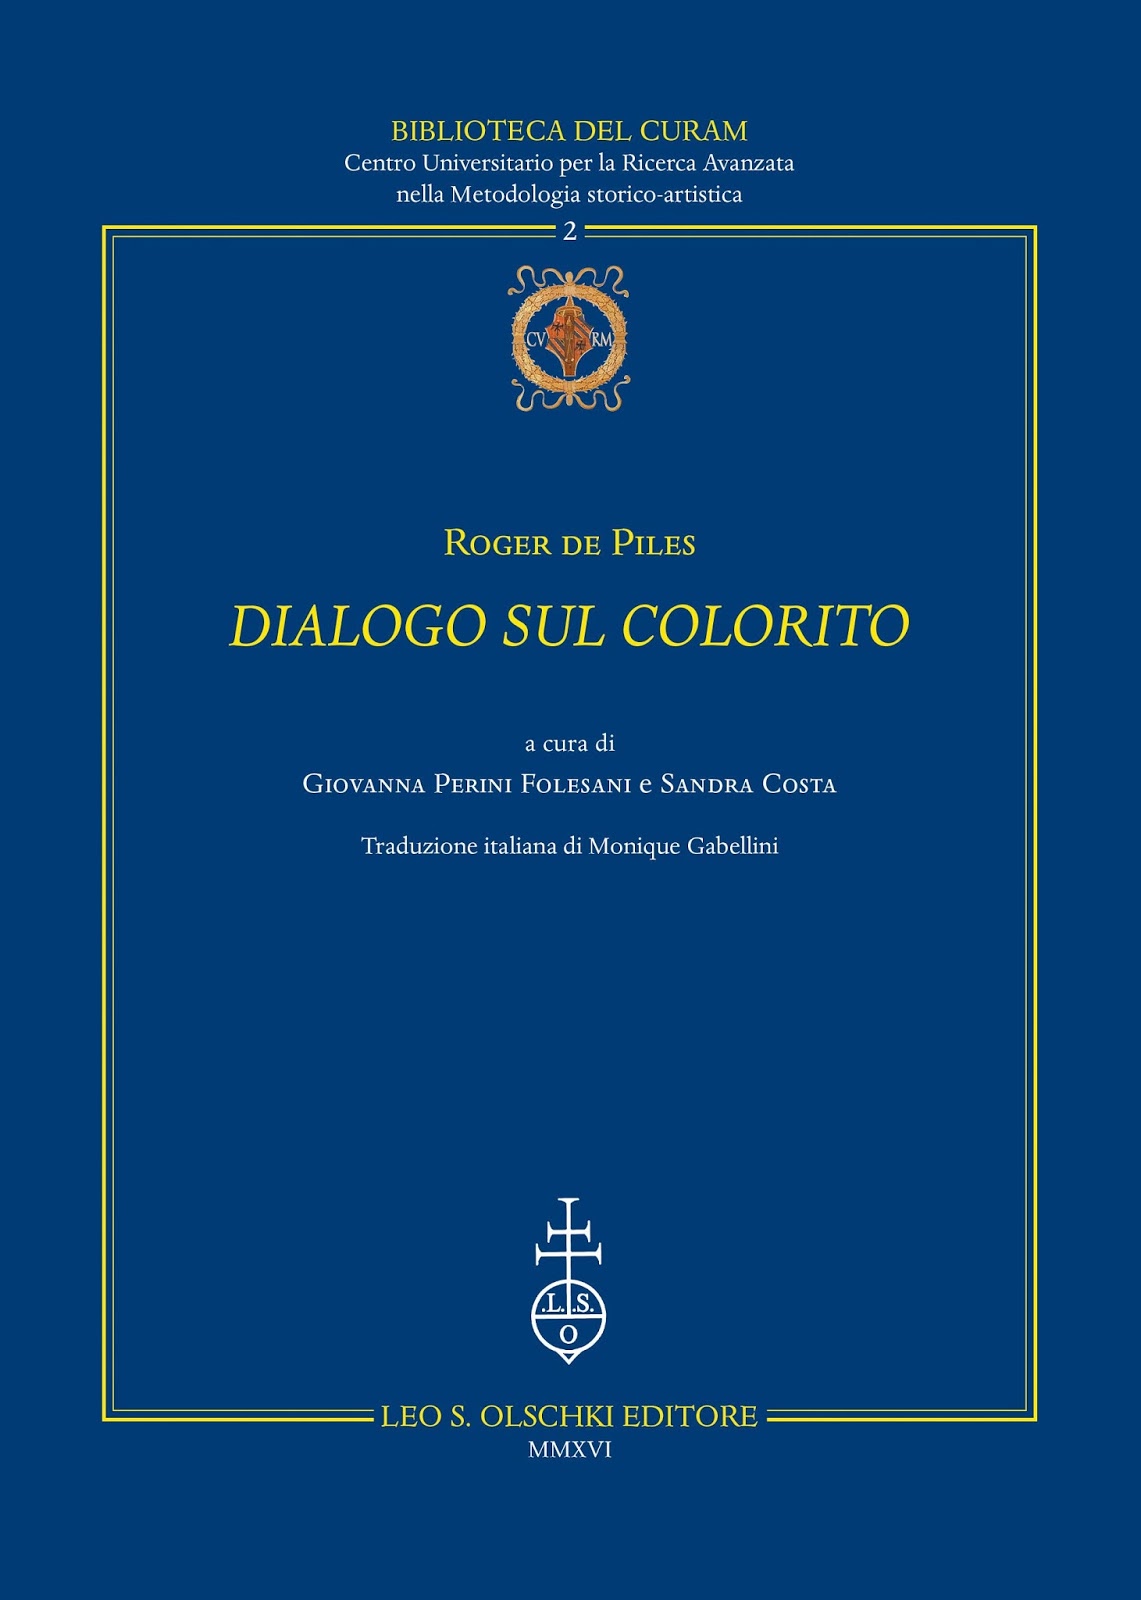 Since the Dialogue sur le coloris was released to the public anonymously in 1673 actually written by Roger de Piles it was never translated into Italian